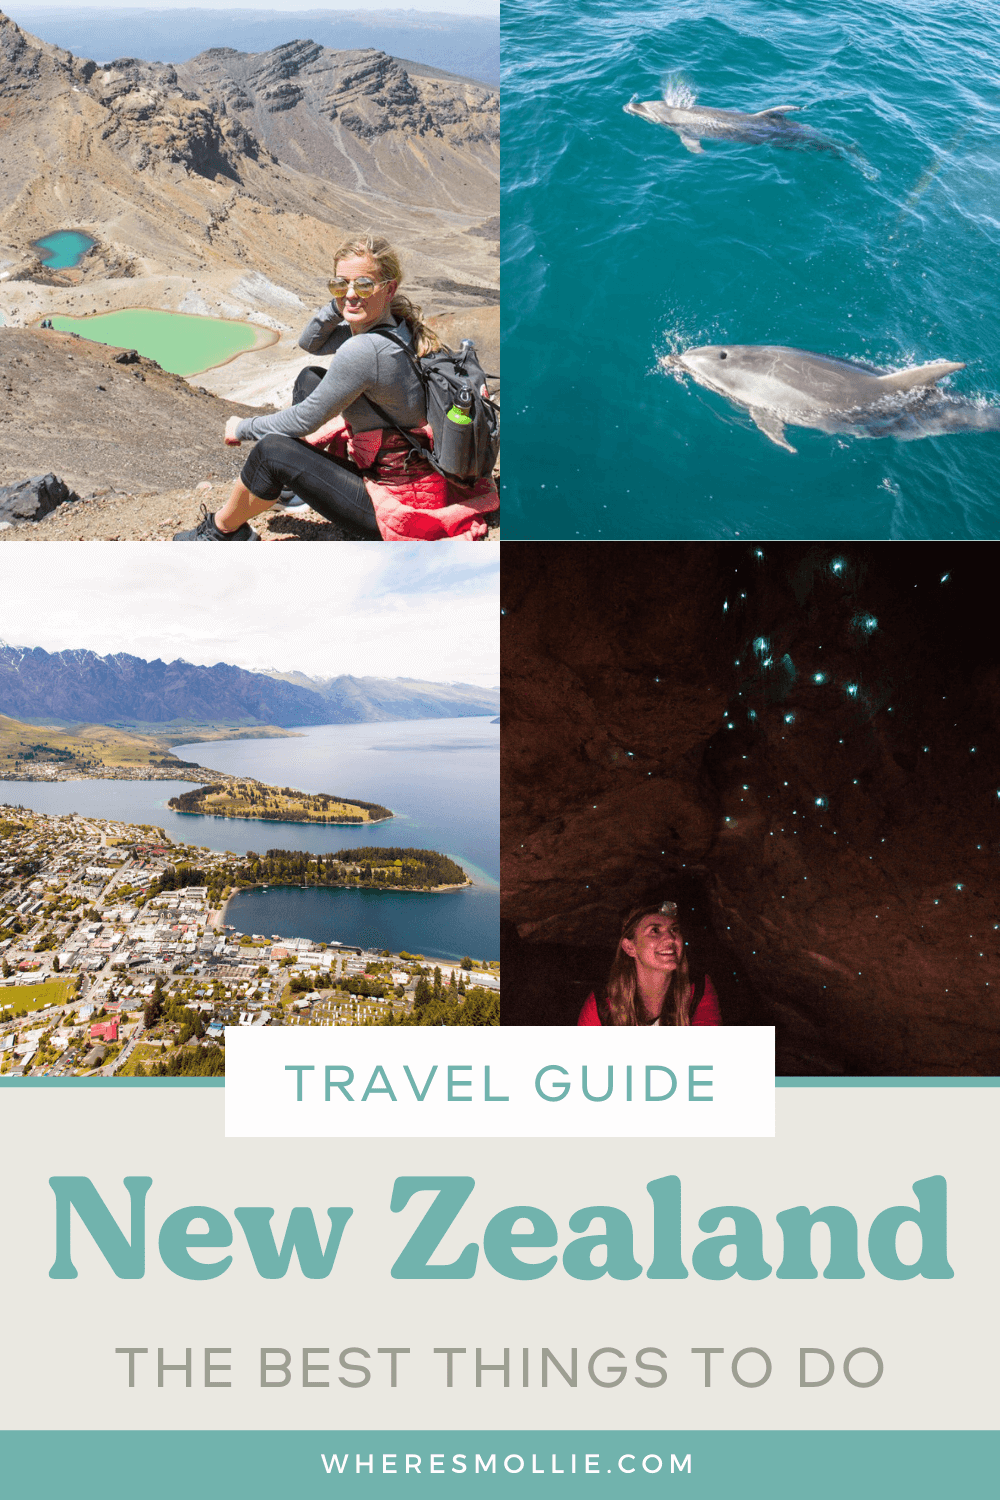 The best things to do in New Zealand